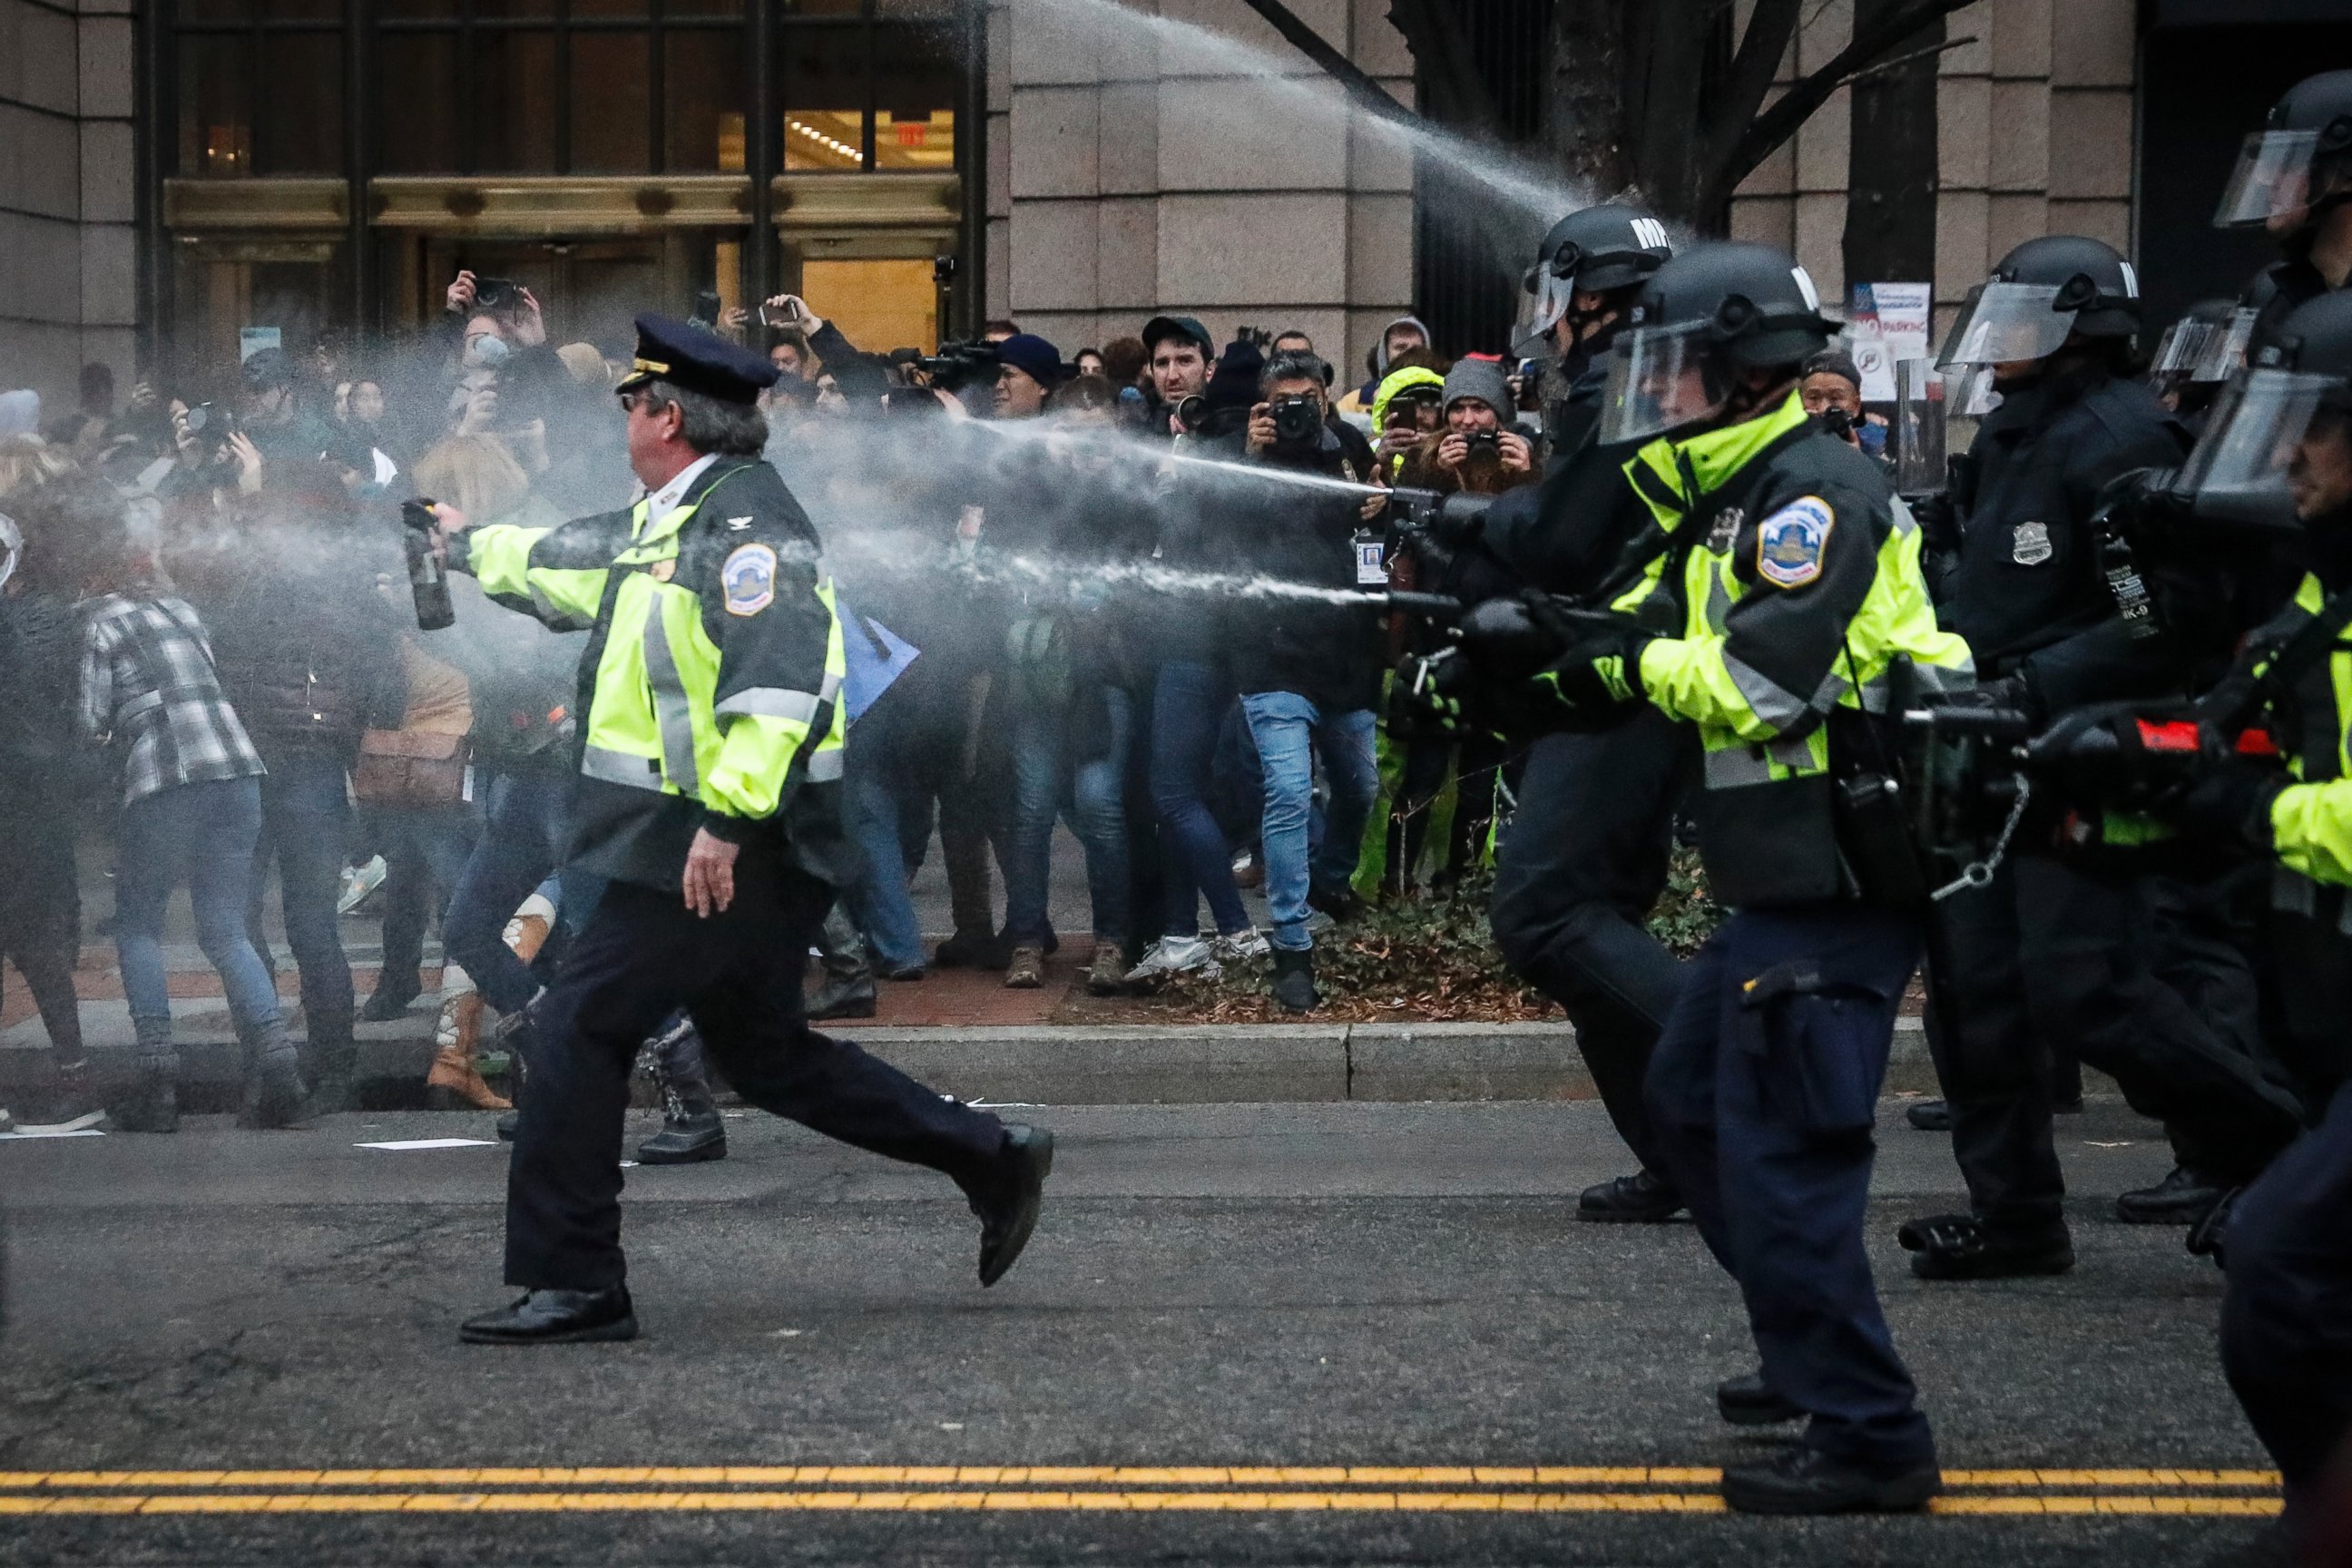 PHOTO: Police fire pepper spray on protesters during a demonstration after the inauguration of President Donald Trump, Jan. 20, 2017, in Washington.